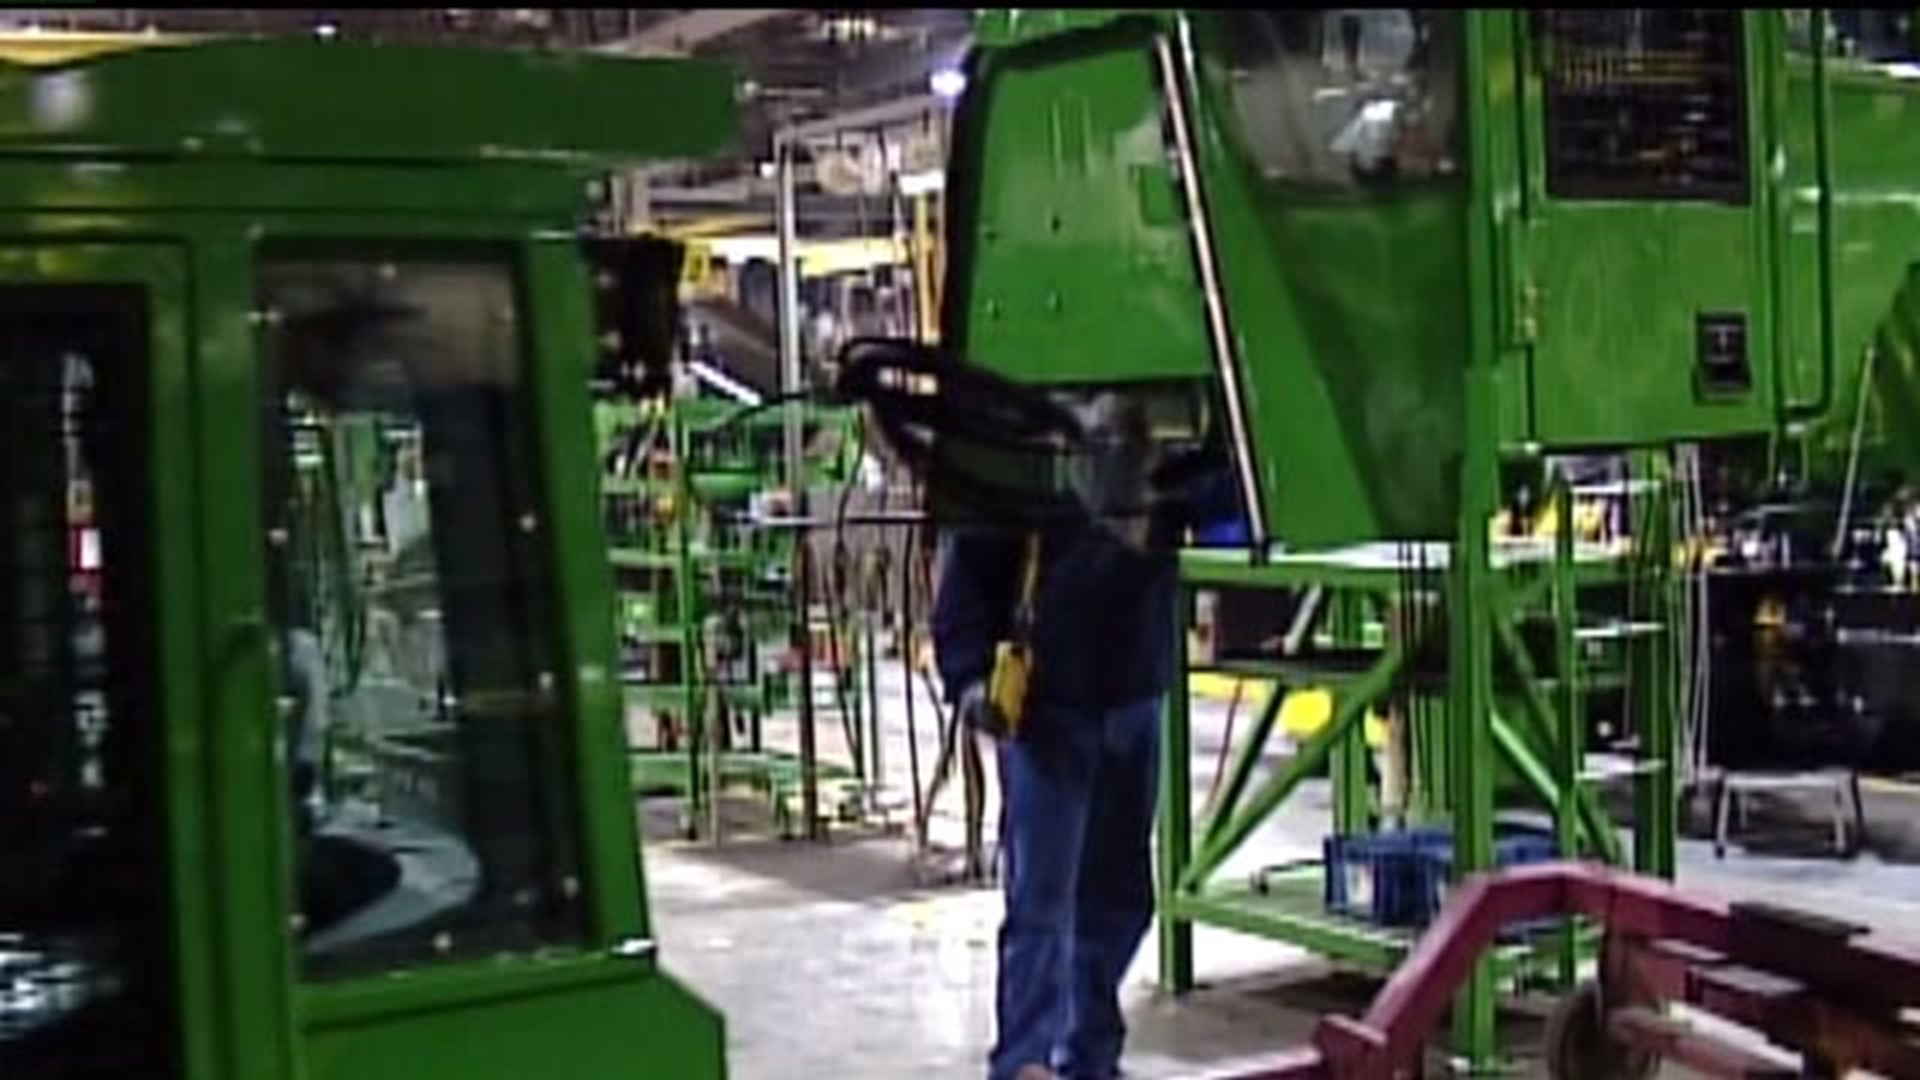 John Deere announces layoffs for 145 workers